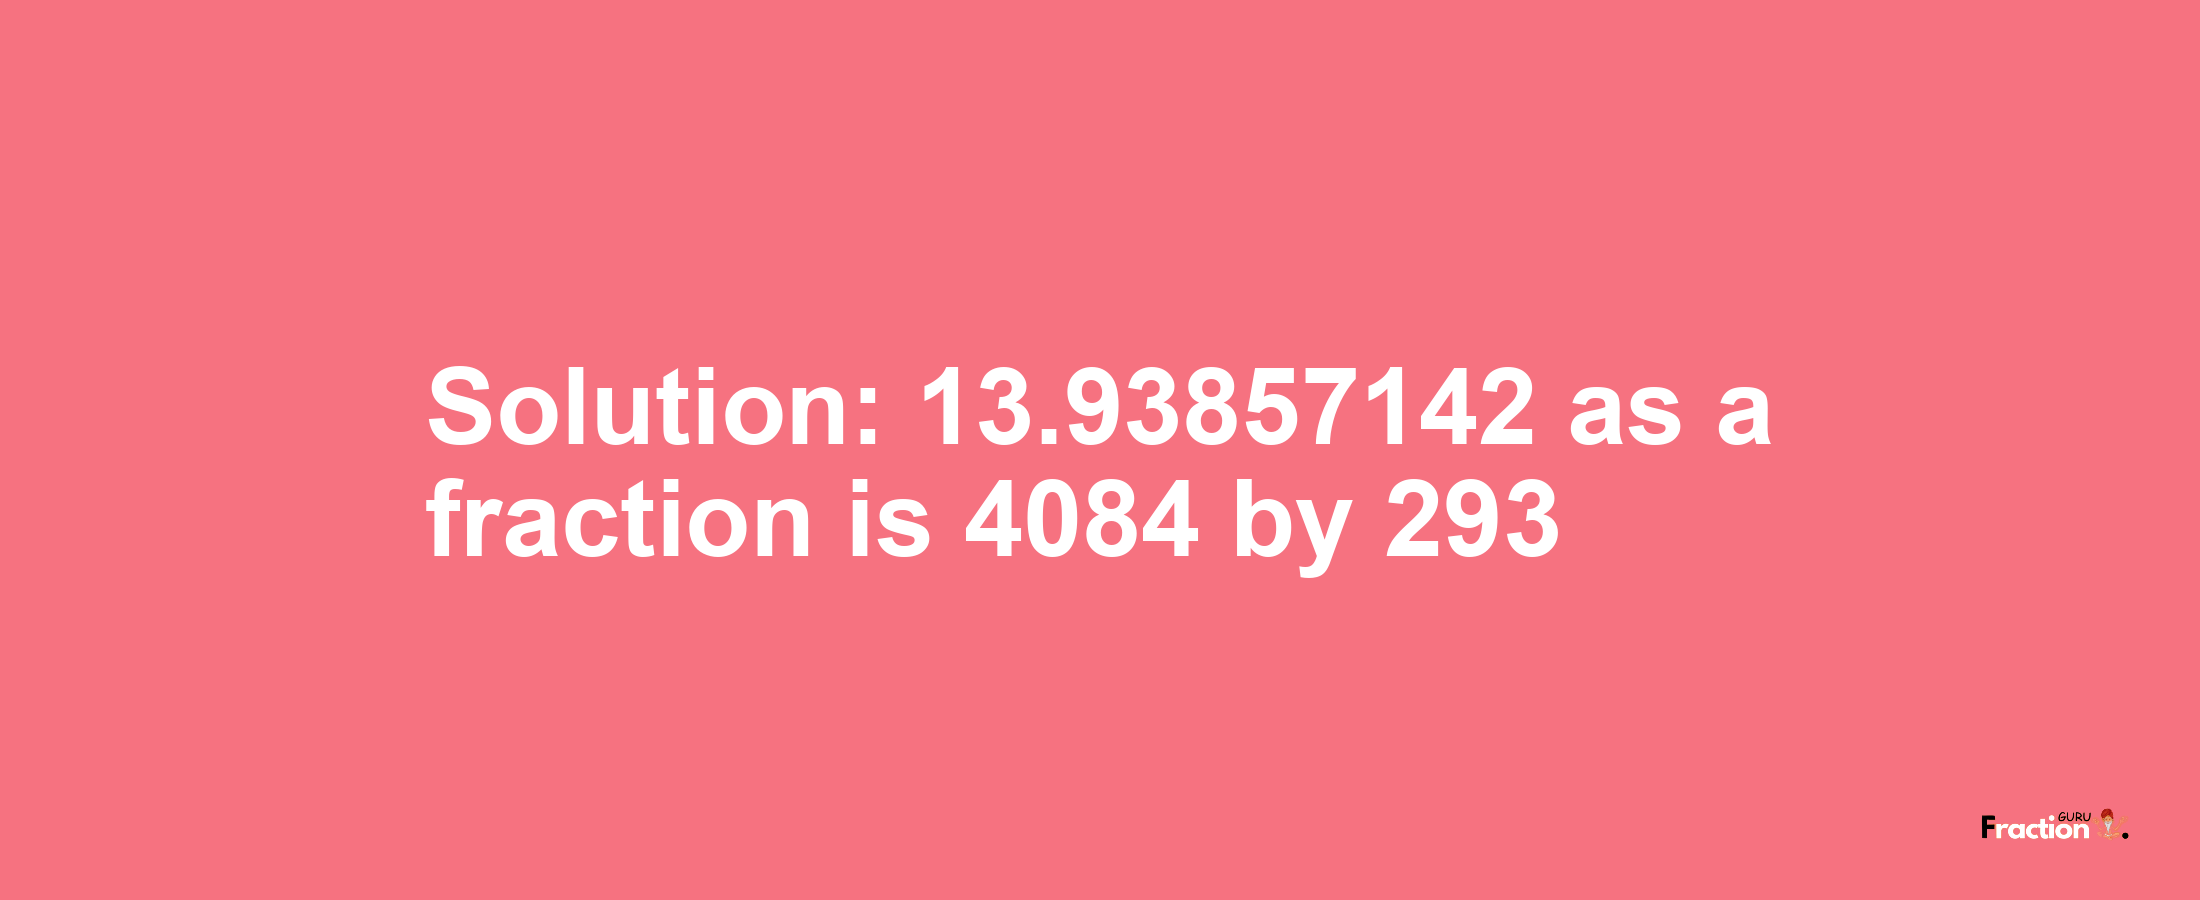 Solution:13.93857142 as a fraction is 4084/293